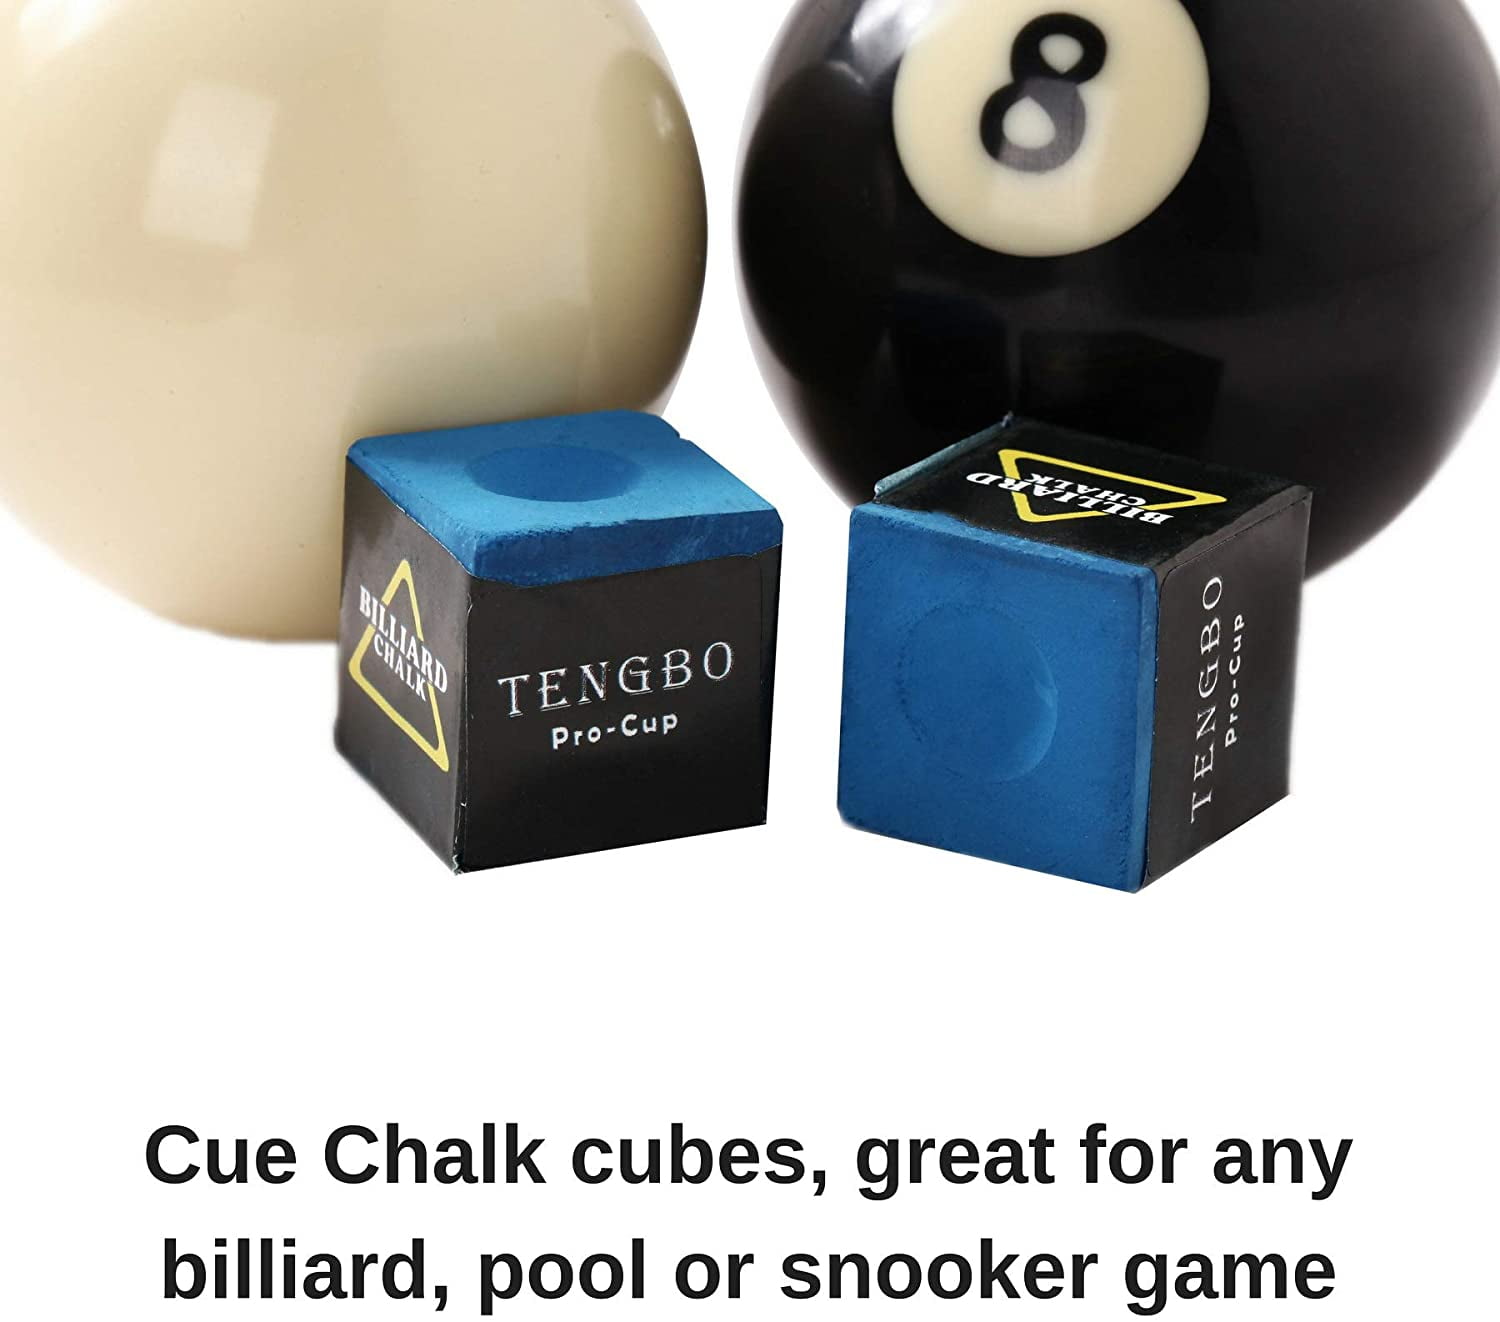 Billiard Cue Bridge Spider Head and Cue Cross X Rest, 5 Cue Chalk Cubes and  2 Table Spots - Pool Table Game Accessories for Cue Sticks 